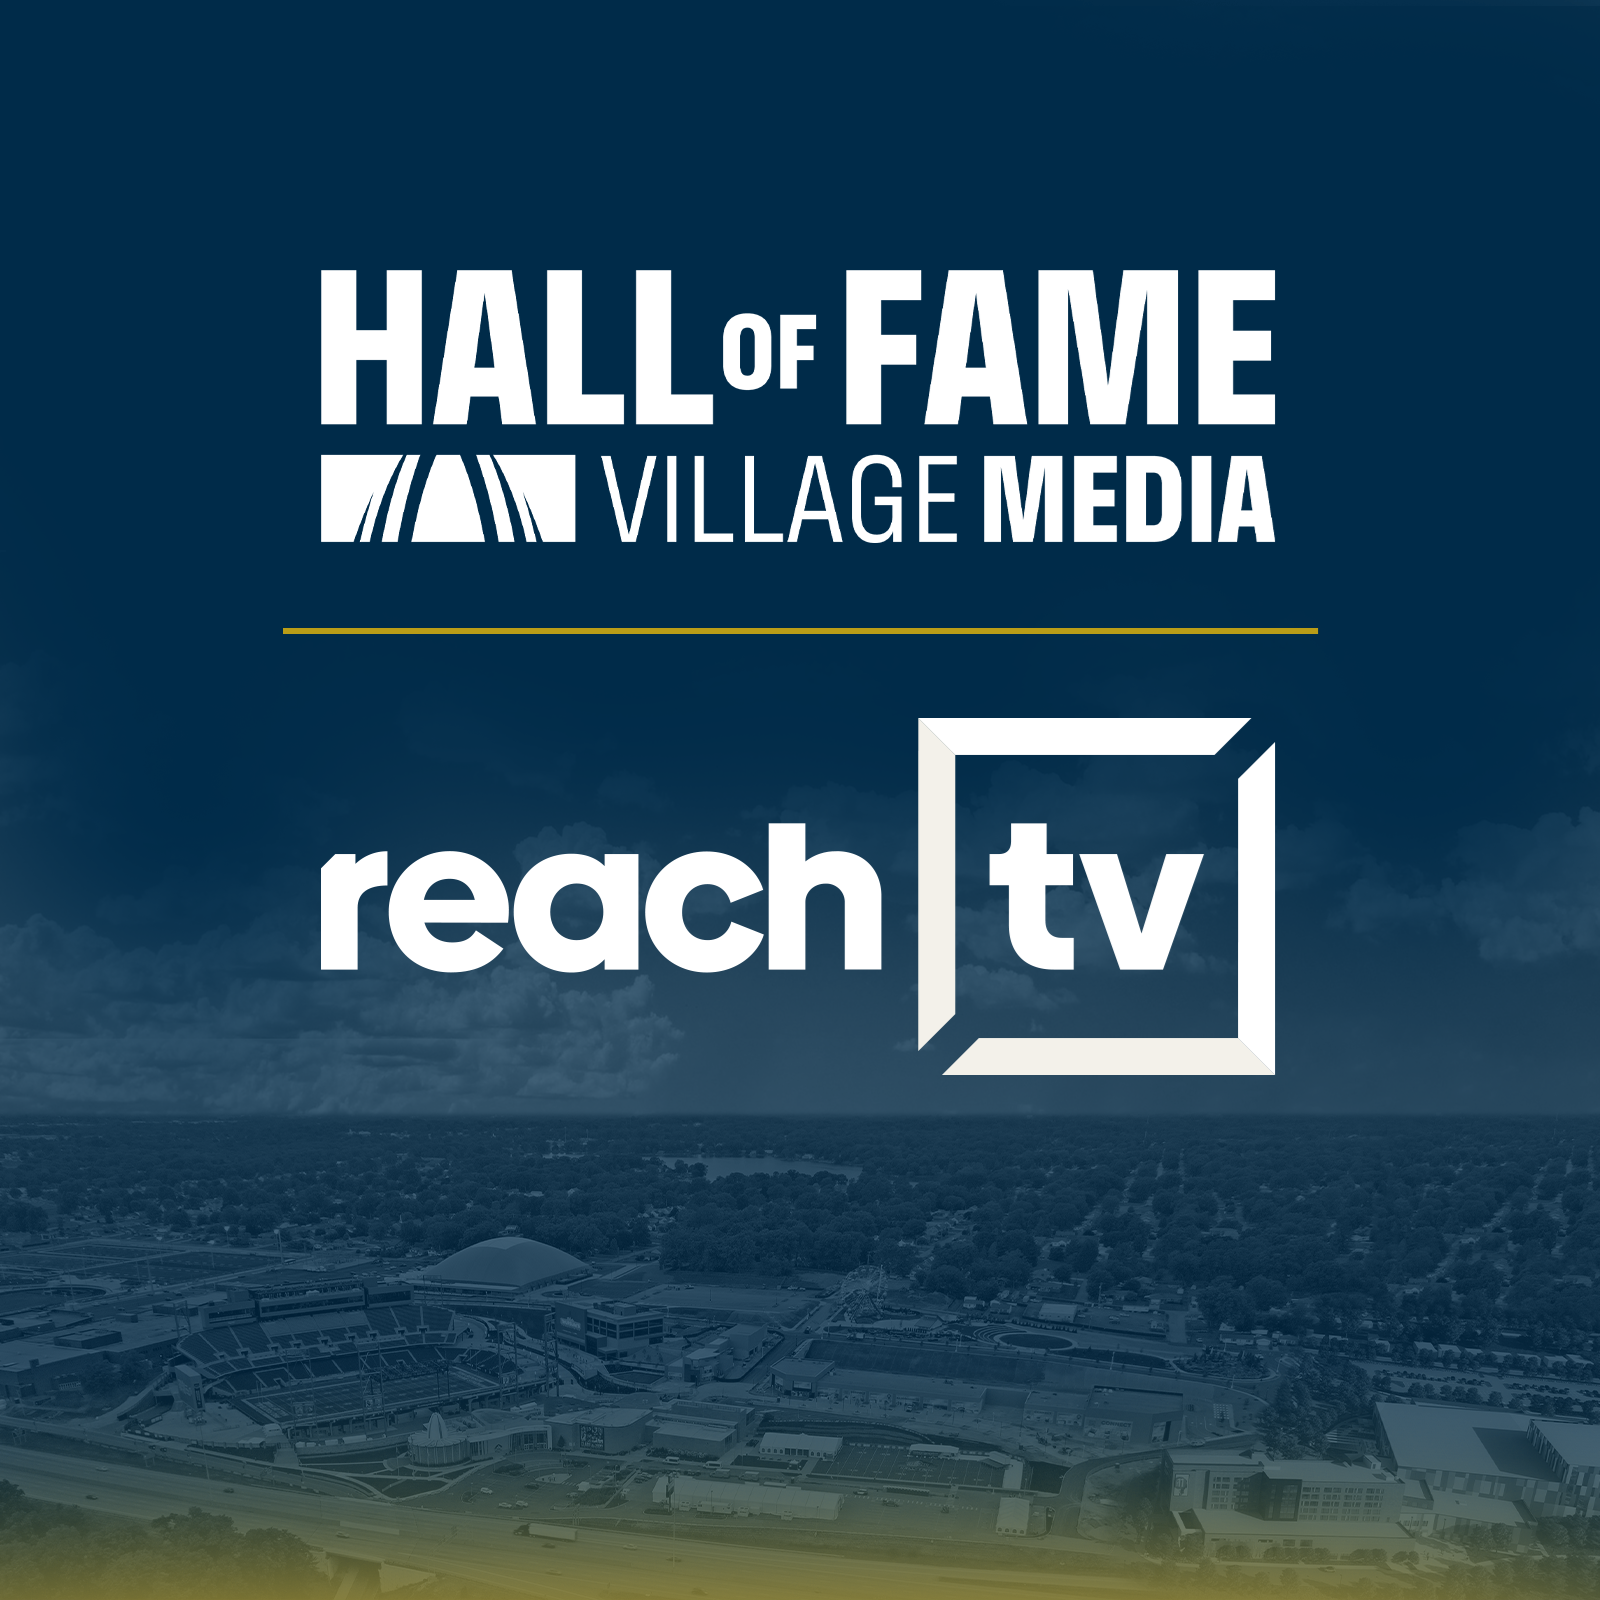 Hall of Fame Village Media and ReachTV to Bring Two Original Sports Programs to Life